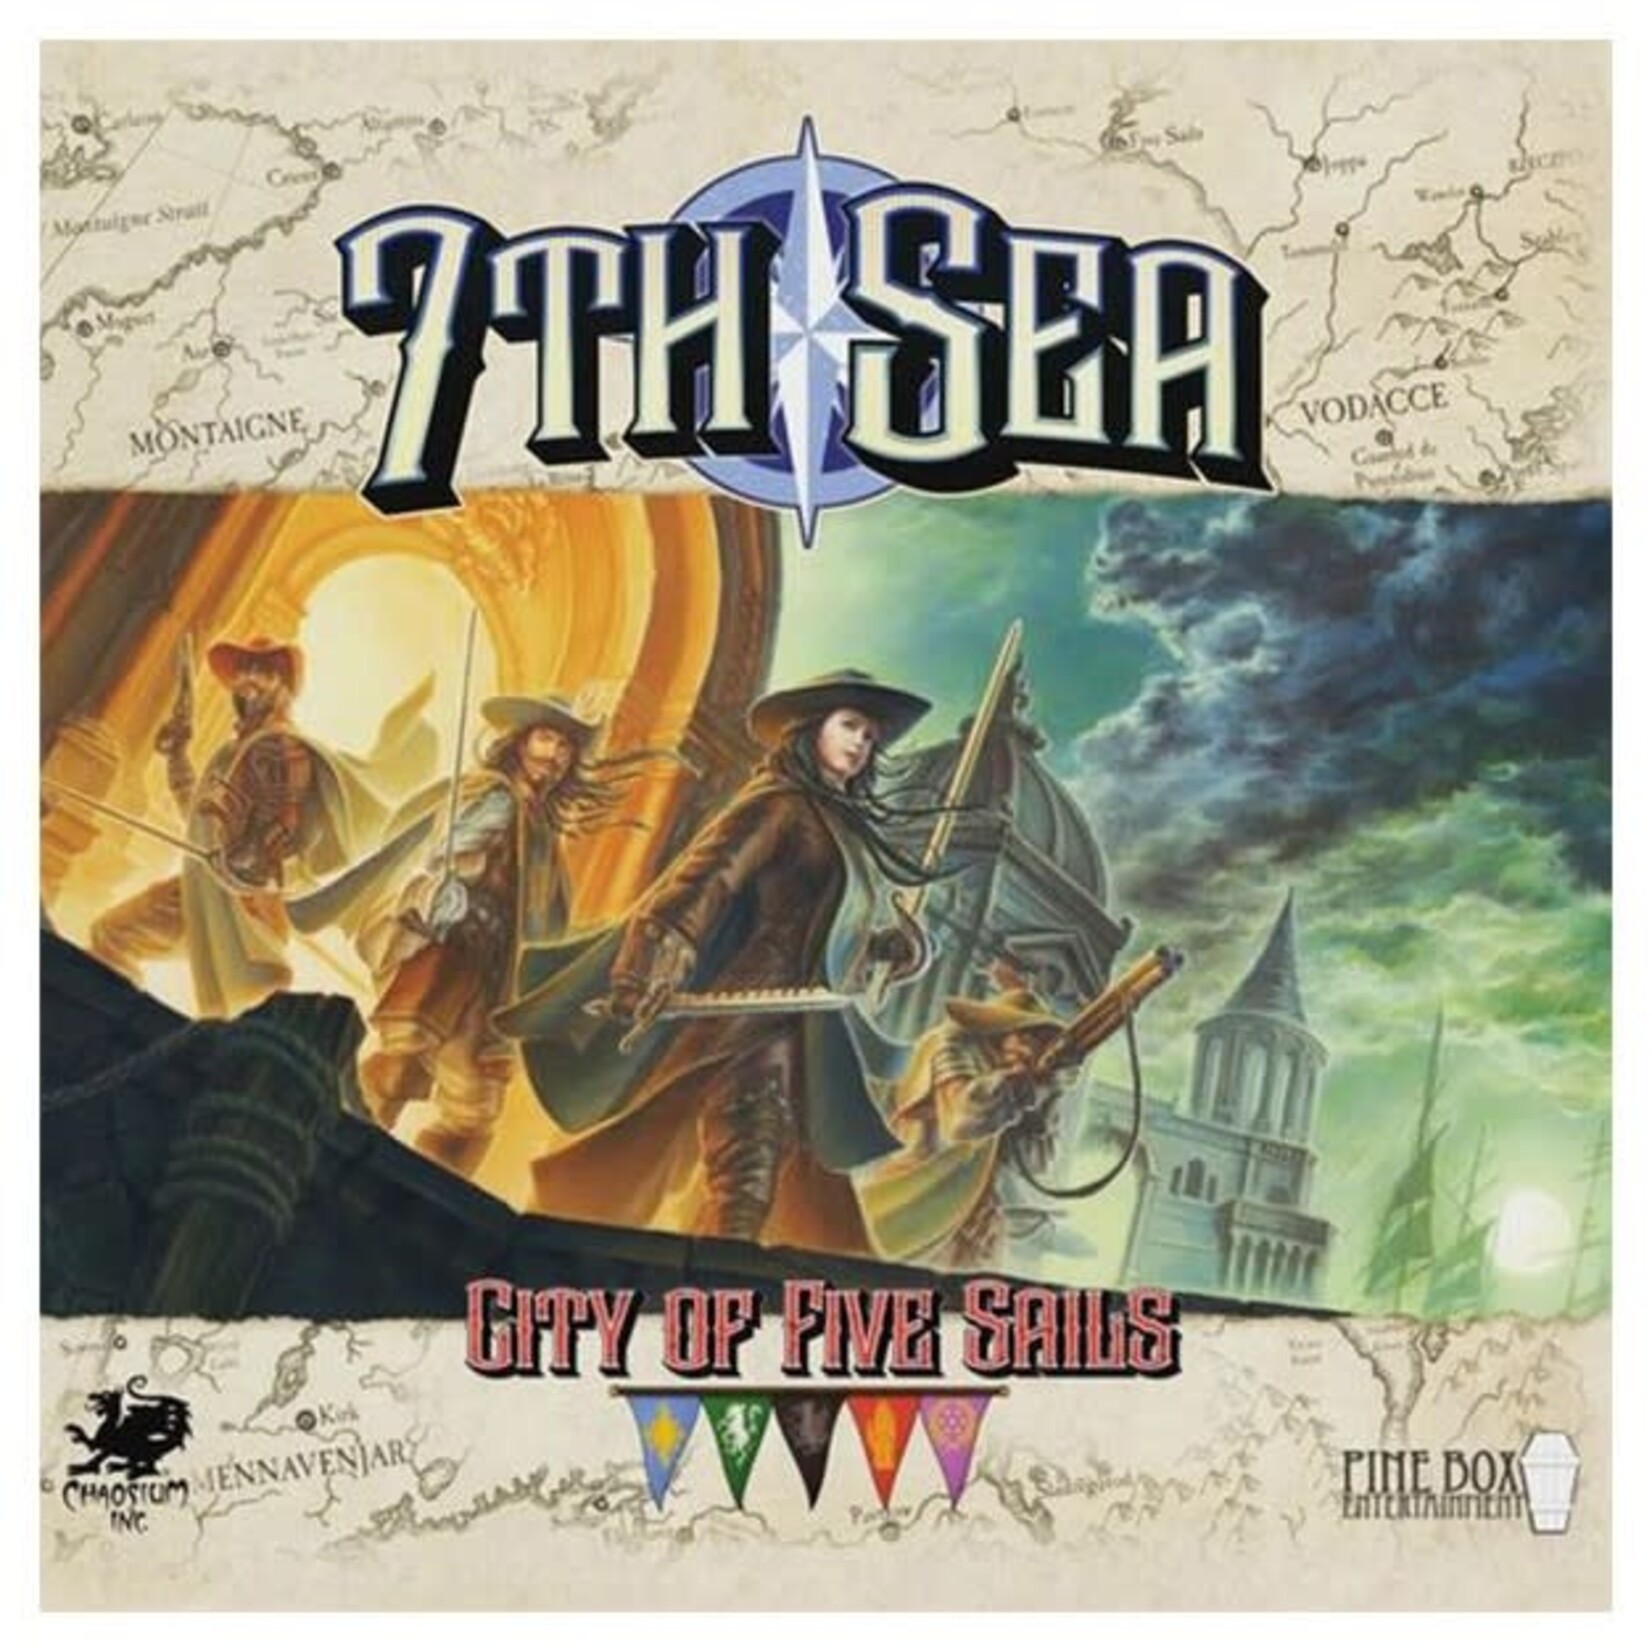 Pinebox Entertainment 7th Sea: City of Five Sails